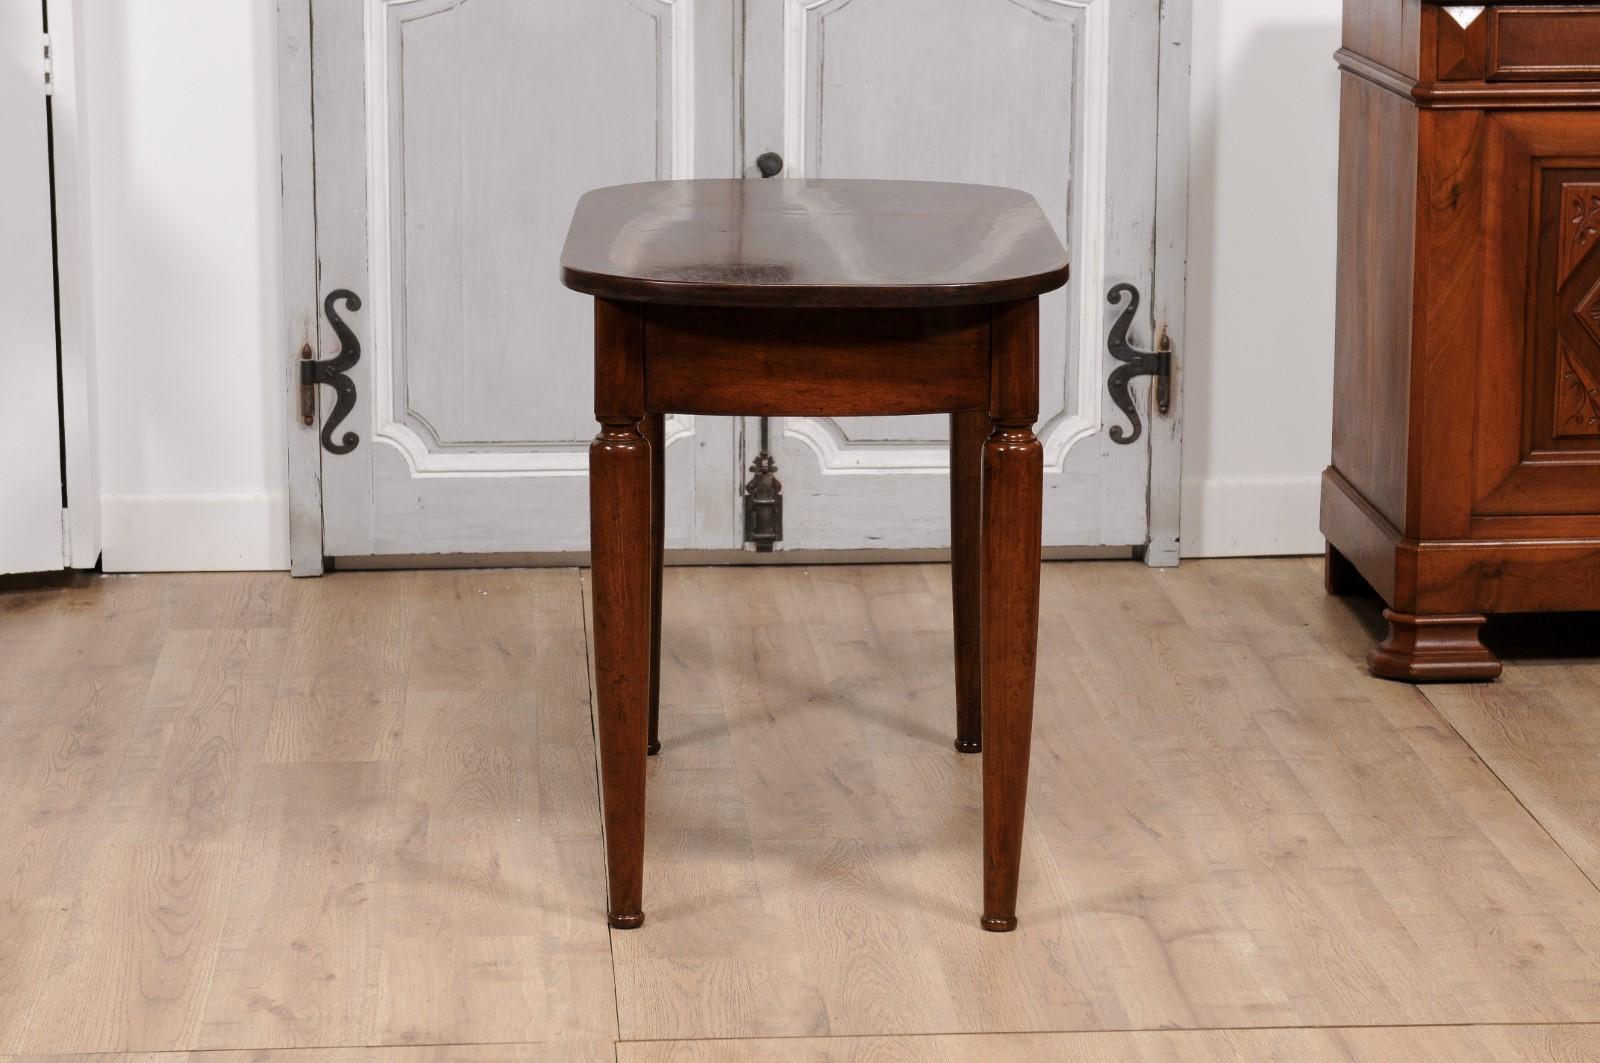 Italian Walnut 1890s Side Table with Oval Top, One Drawer and Cylindrical Legs For Sale 4